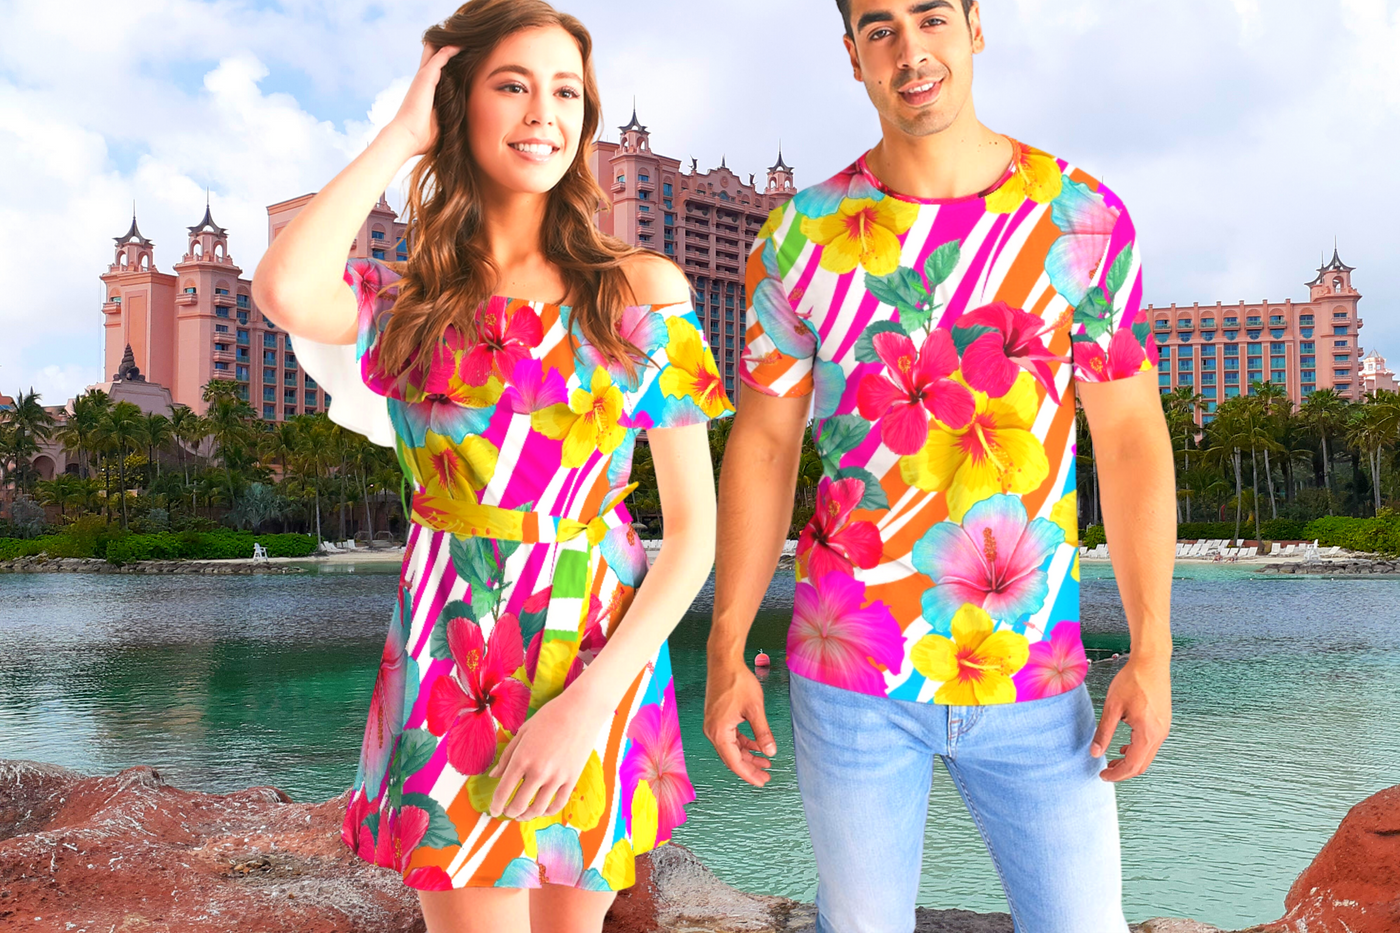 Bahama Bella Couples Matching Wear in Island Flowers Print Men's Tee and Women's Off the Shoulder Dress.